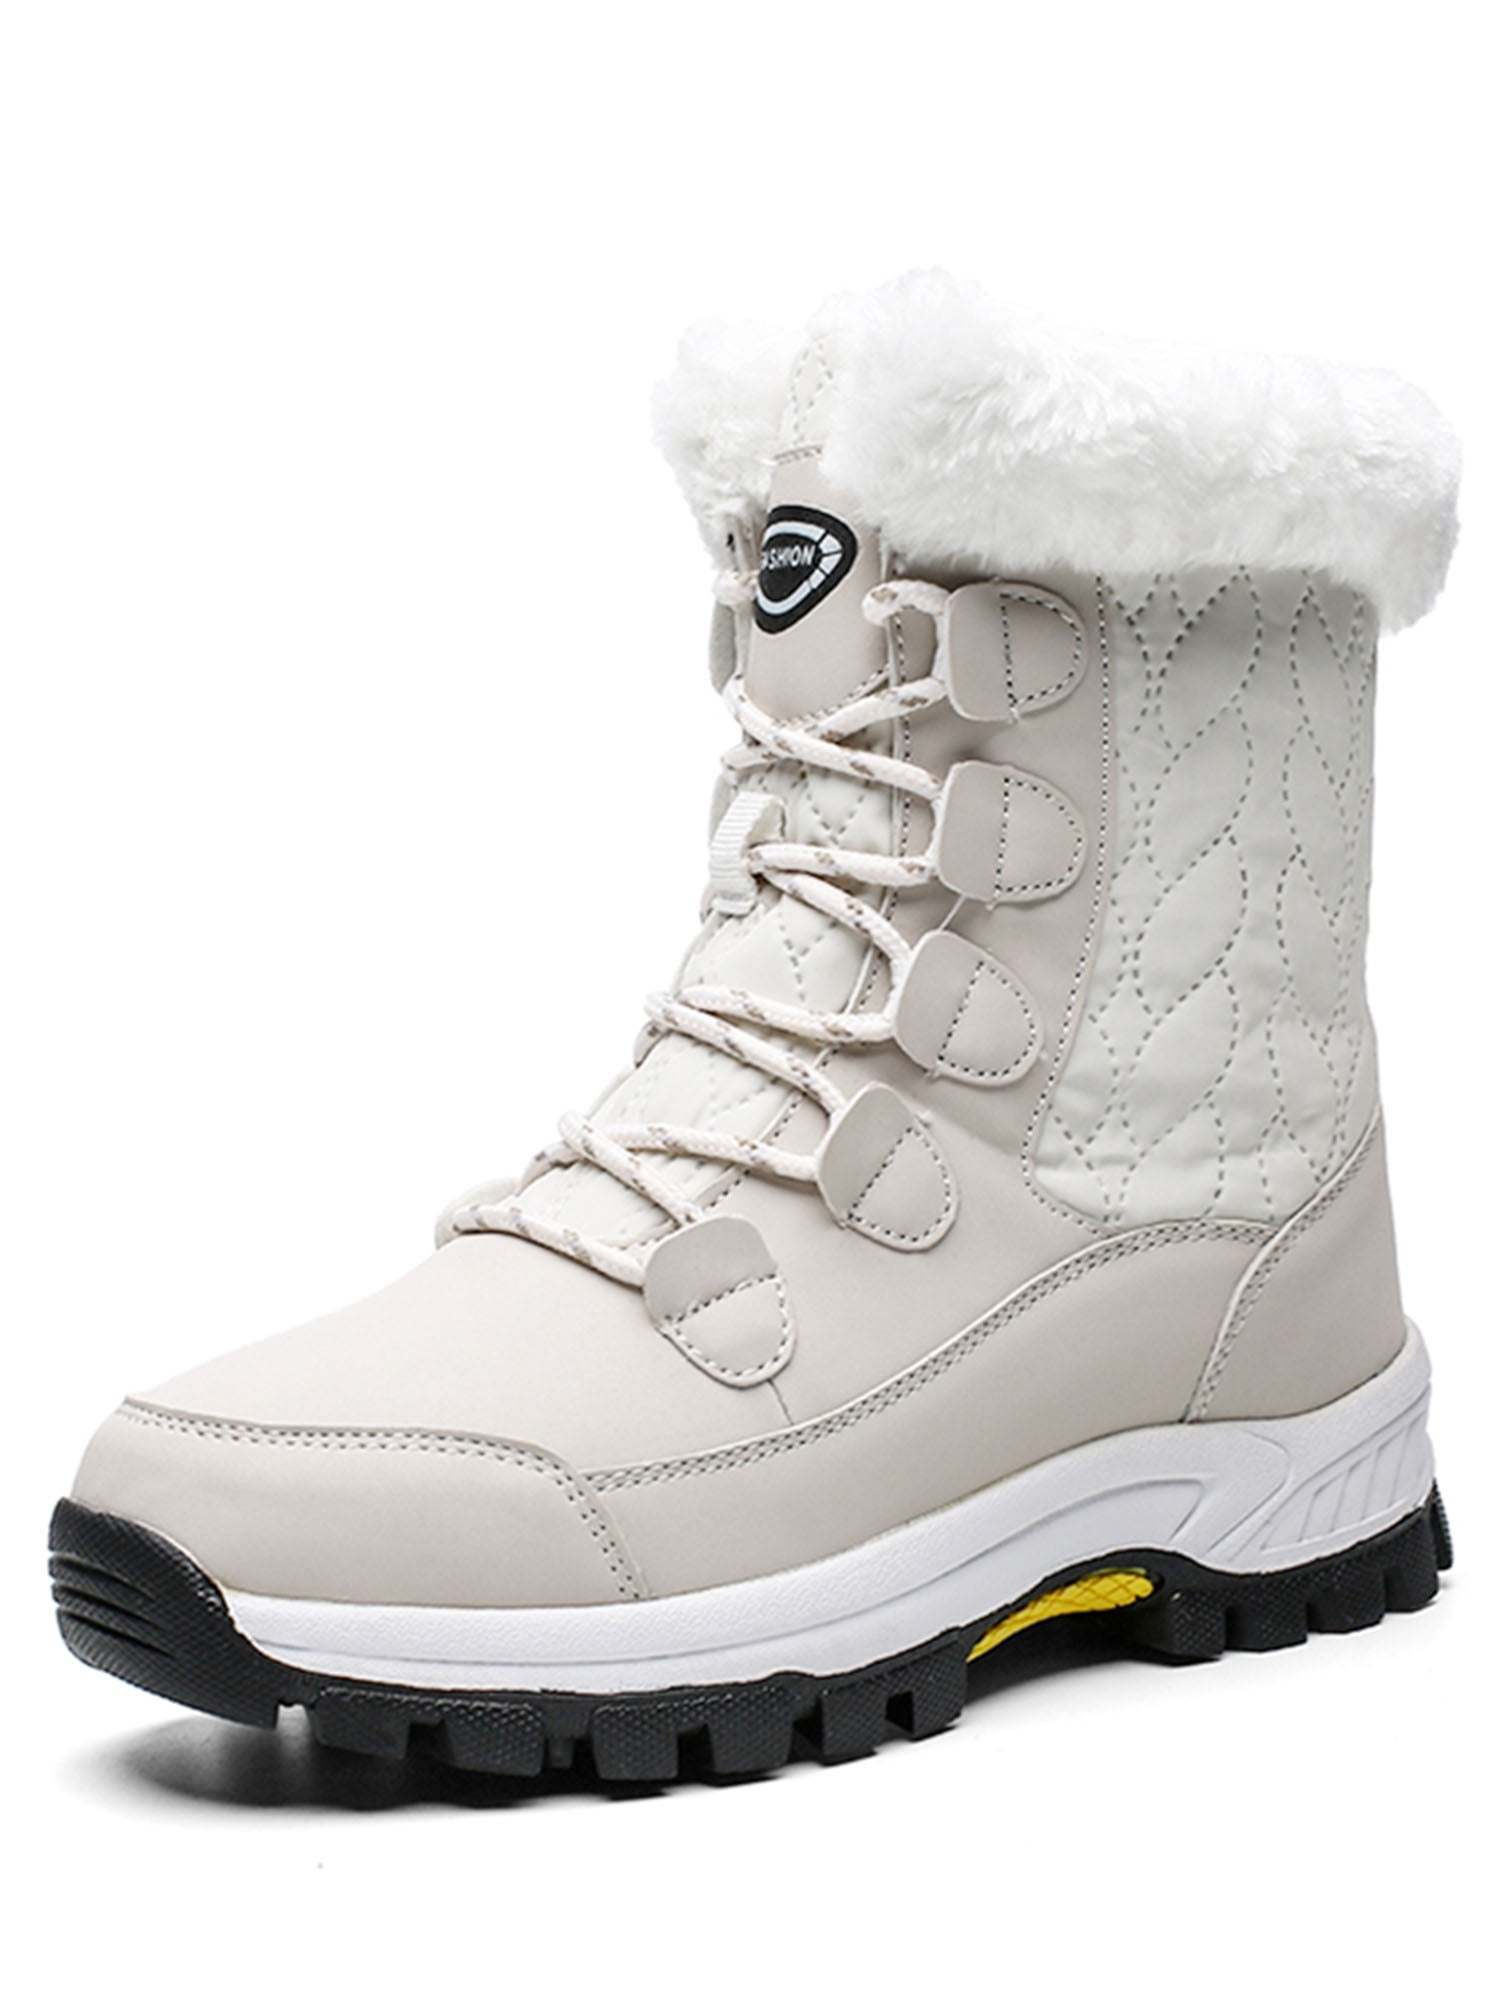 Details about   Womens Lady Fur Lined Mid Rain Calf Boots Warm Waterproof Pull On Snow Shoes VIC 